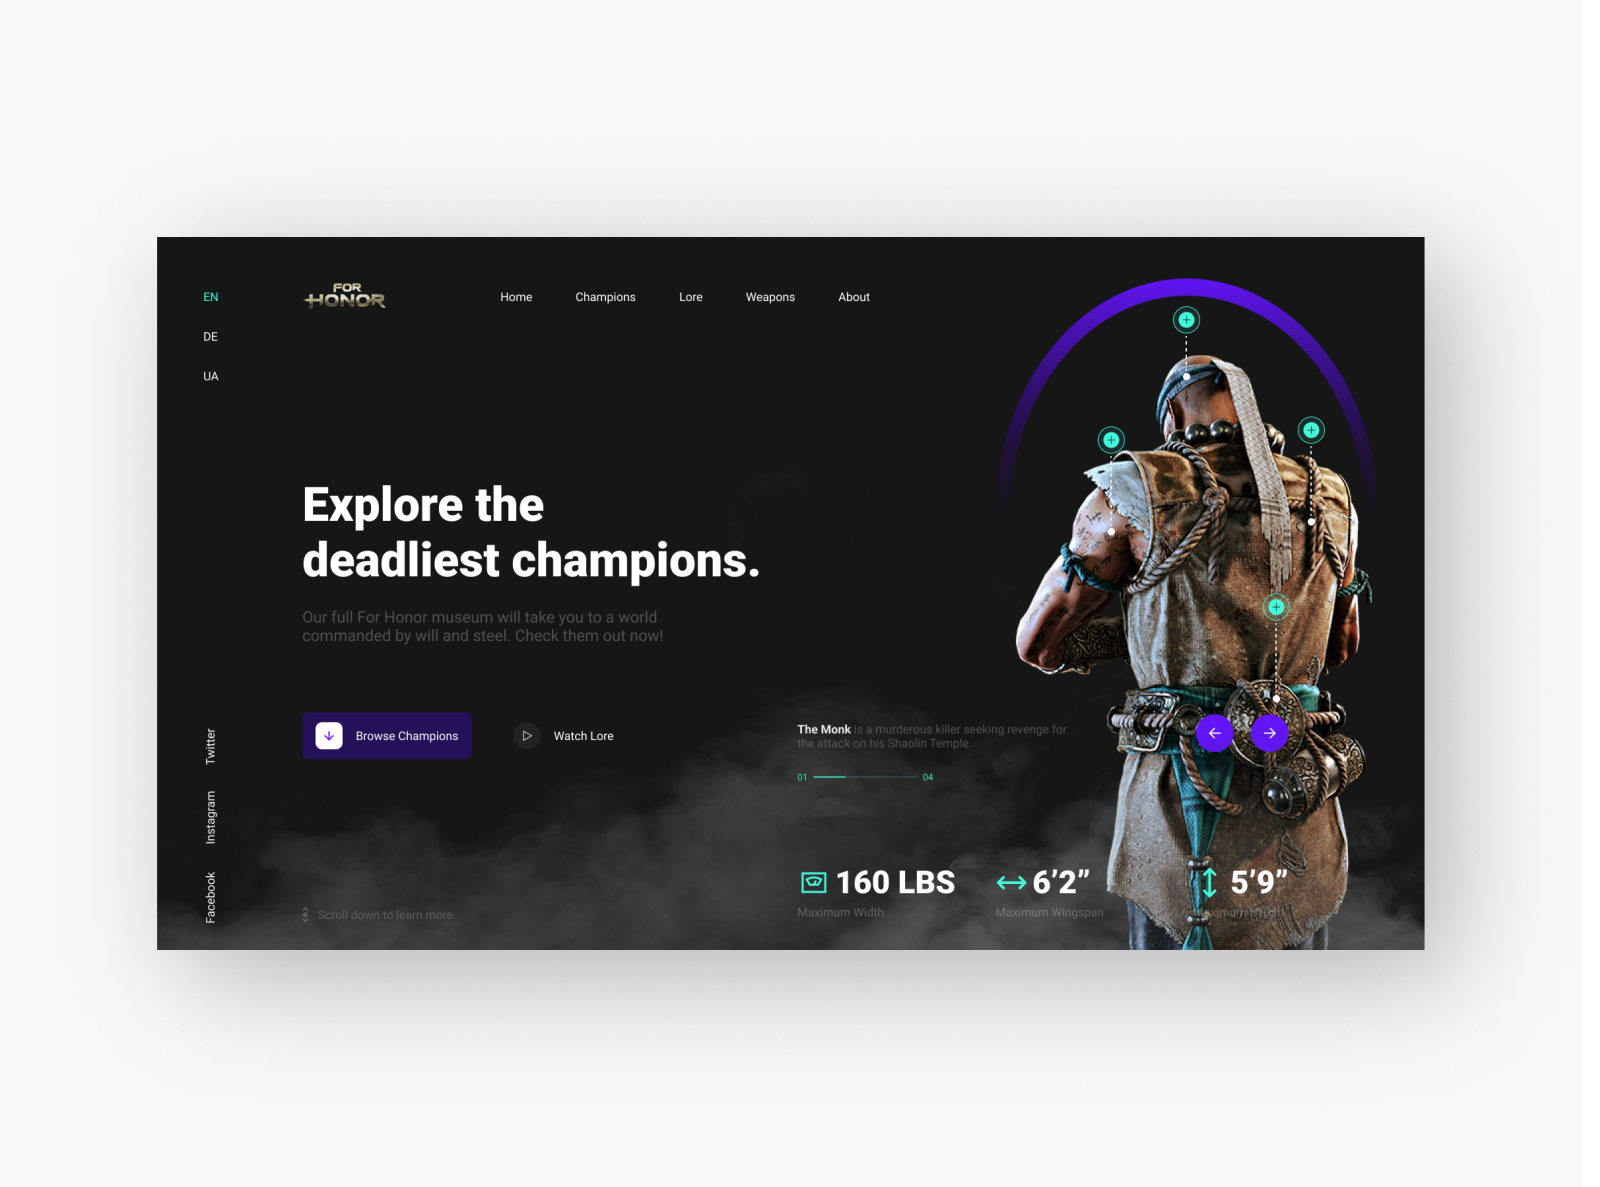 For Honor Champion Gallery By Christian Bonilla On Dribbble